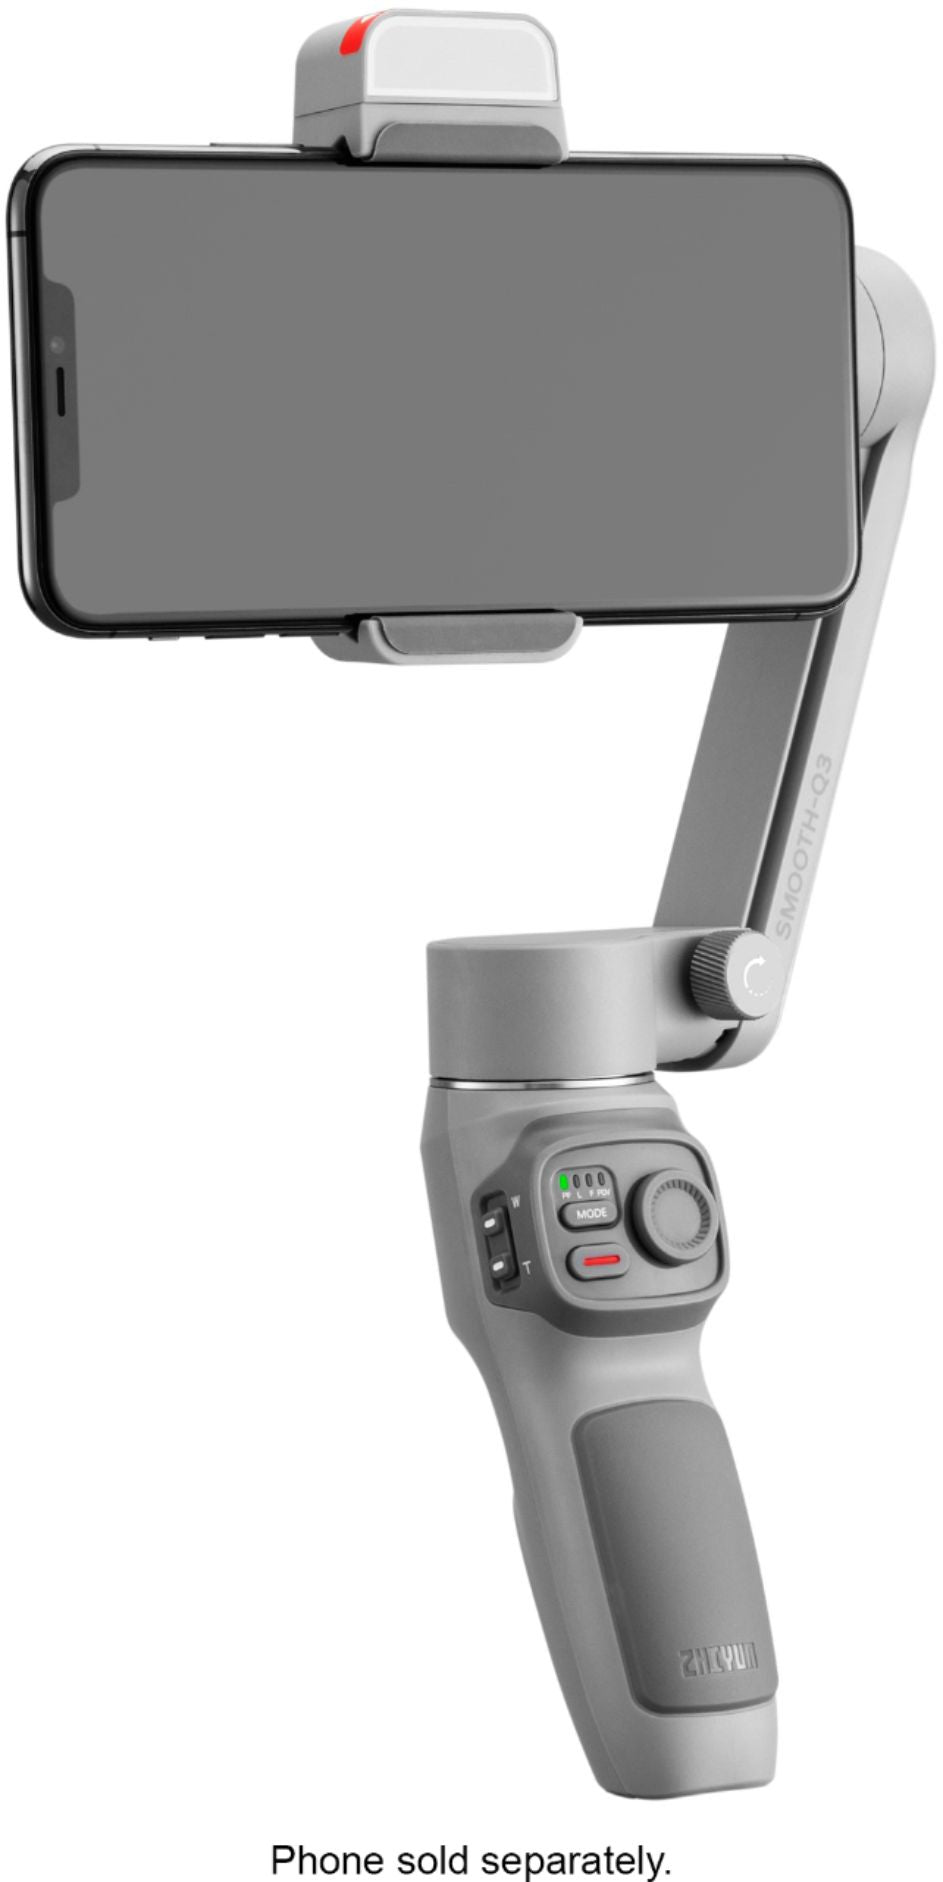 Zhiyun - Smooth Q-3 Compact Folding 3-Axis Gimbal Stabilizer for phones w/ Built-in LED Video Light with detachable tri-pod stand - Gray_20